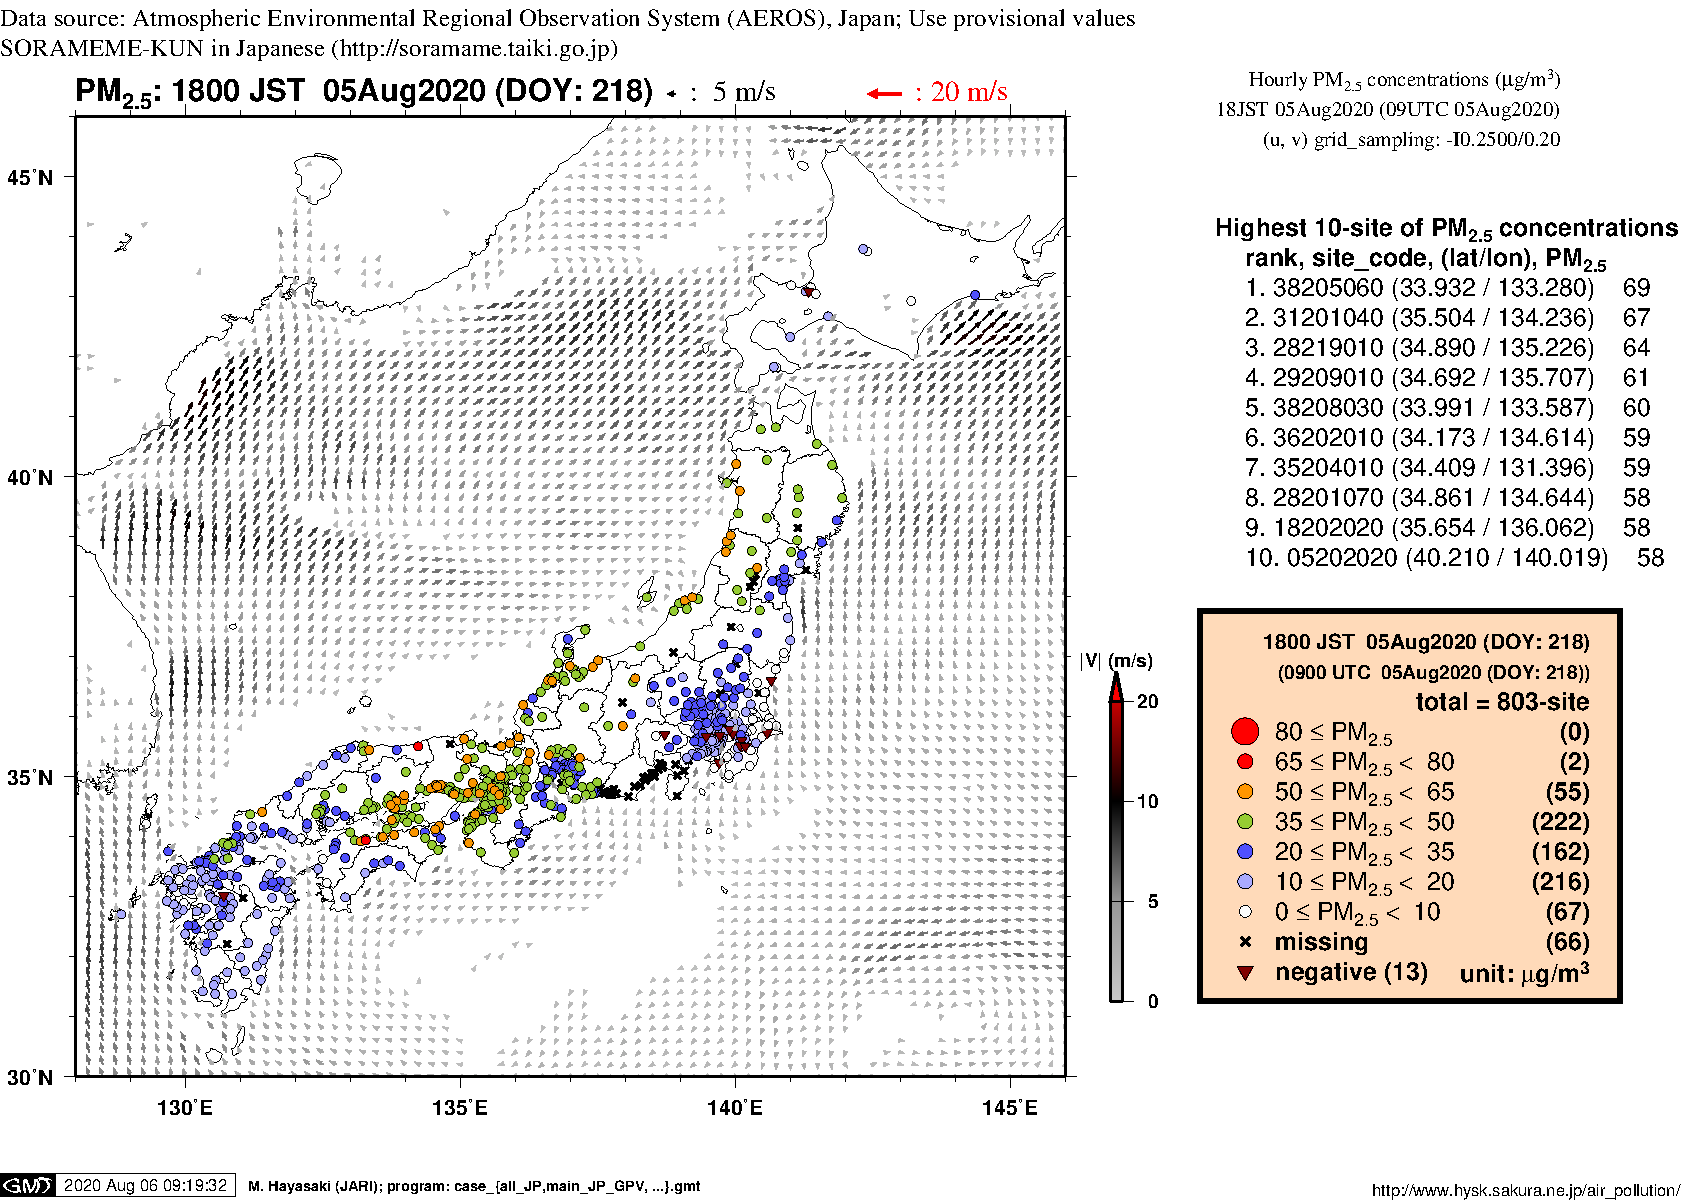 PM2.5 concentration in mainland Japan (18JST 05Aug2020)